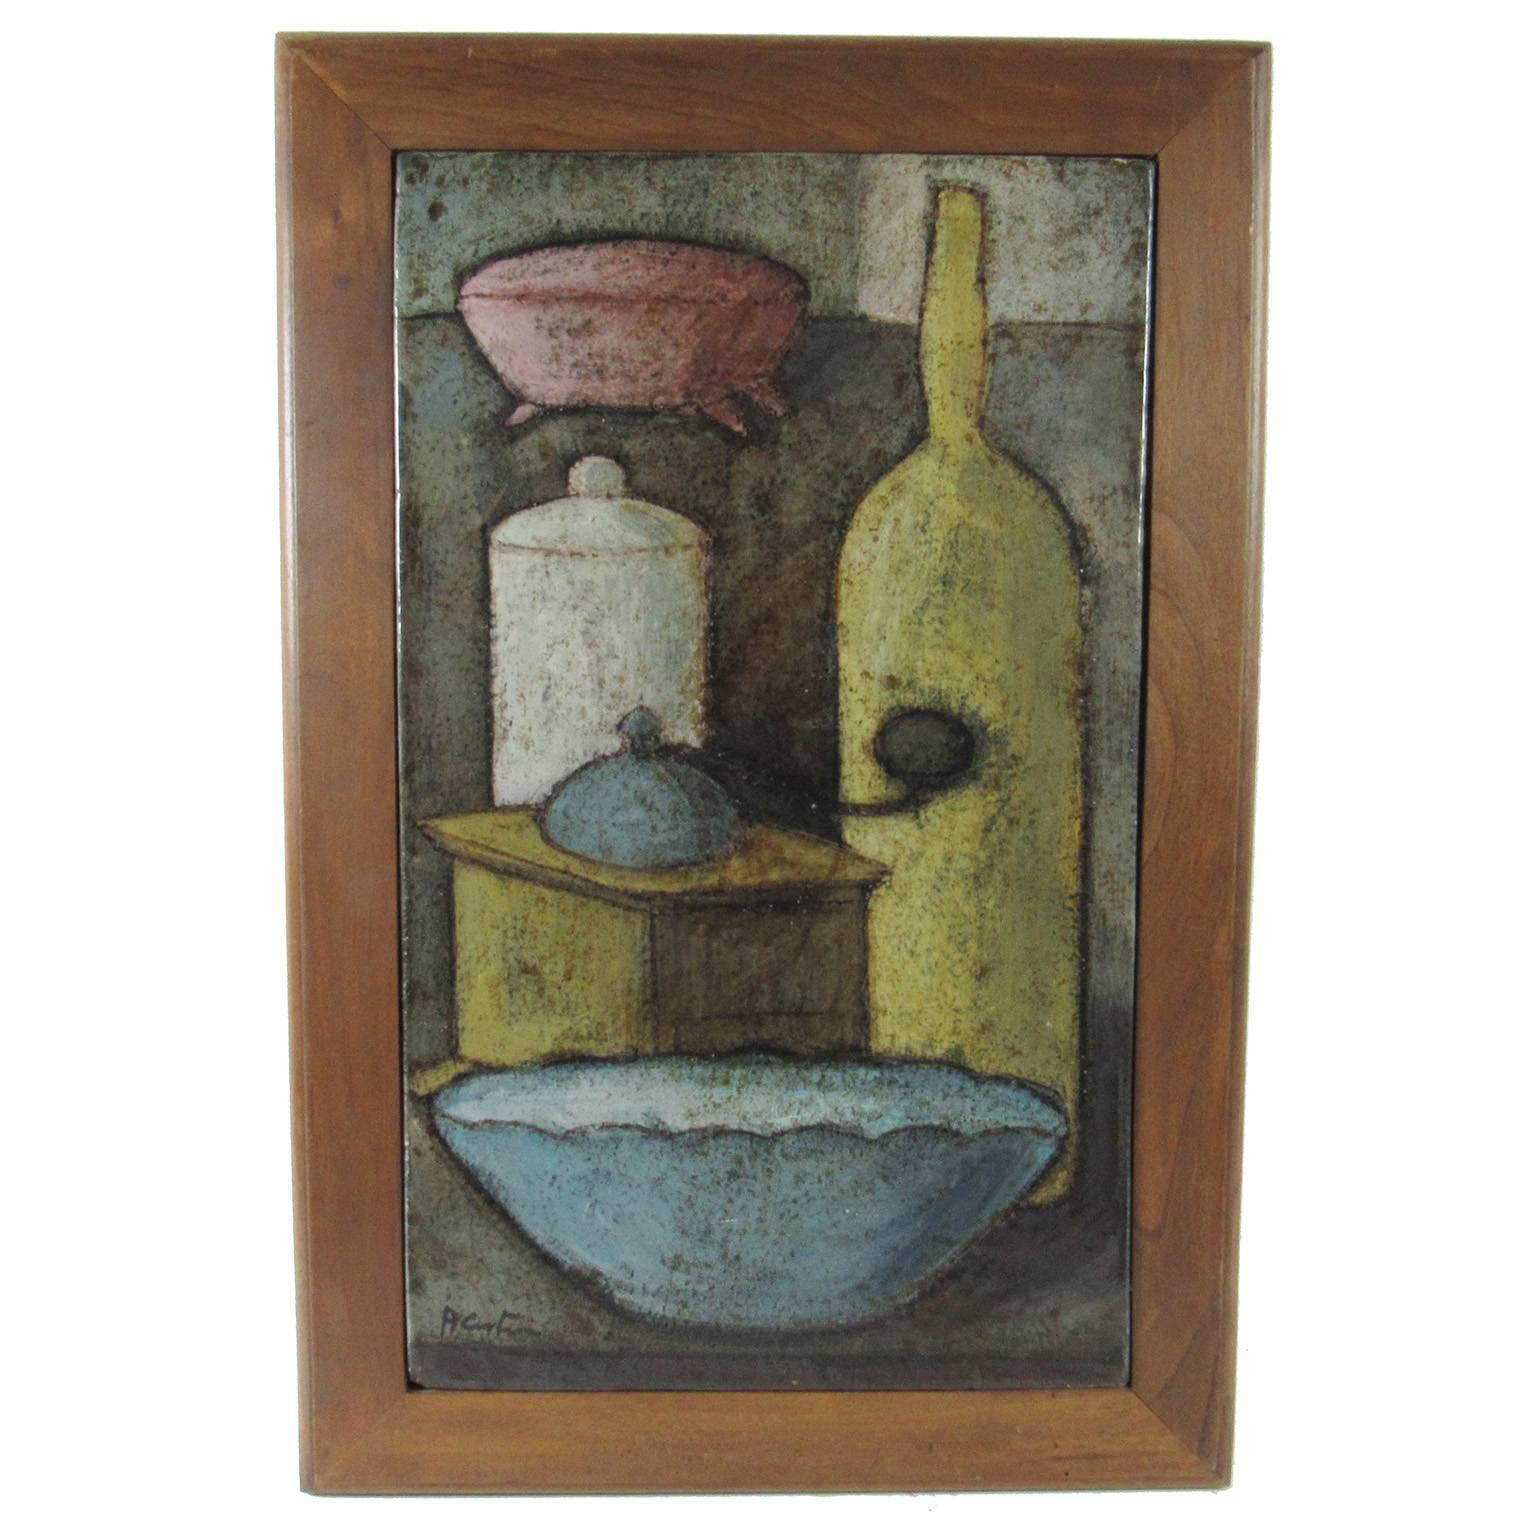 20th century modernist painted still life on ceramic, signed indistinctly lower left. Measures: 19 5/8 x 11 5/8 in.; framed: 24 x 15 3/4 in.